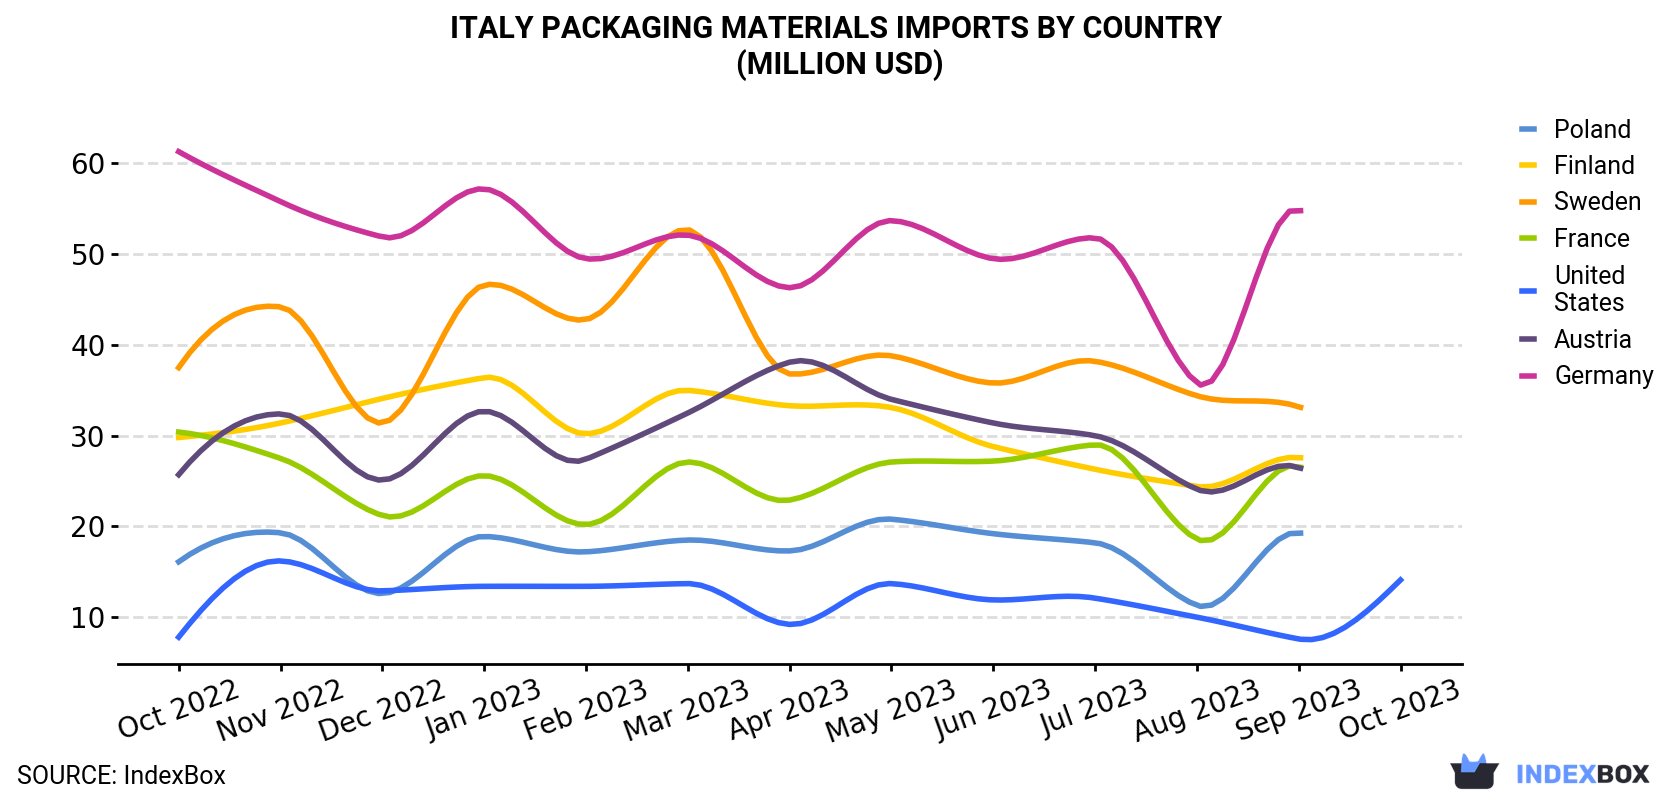 Italy Packaging Materials Imports By Country (Million USD)